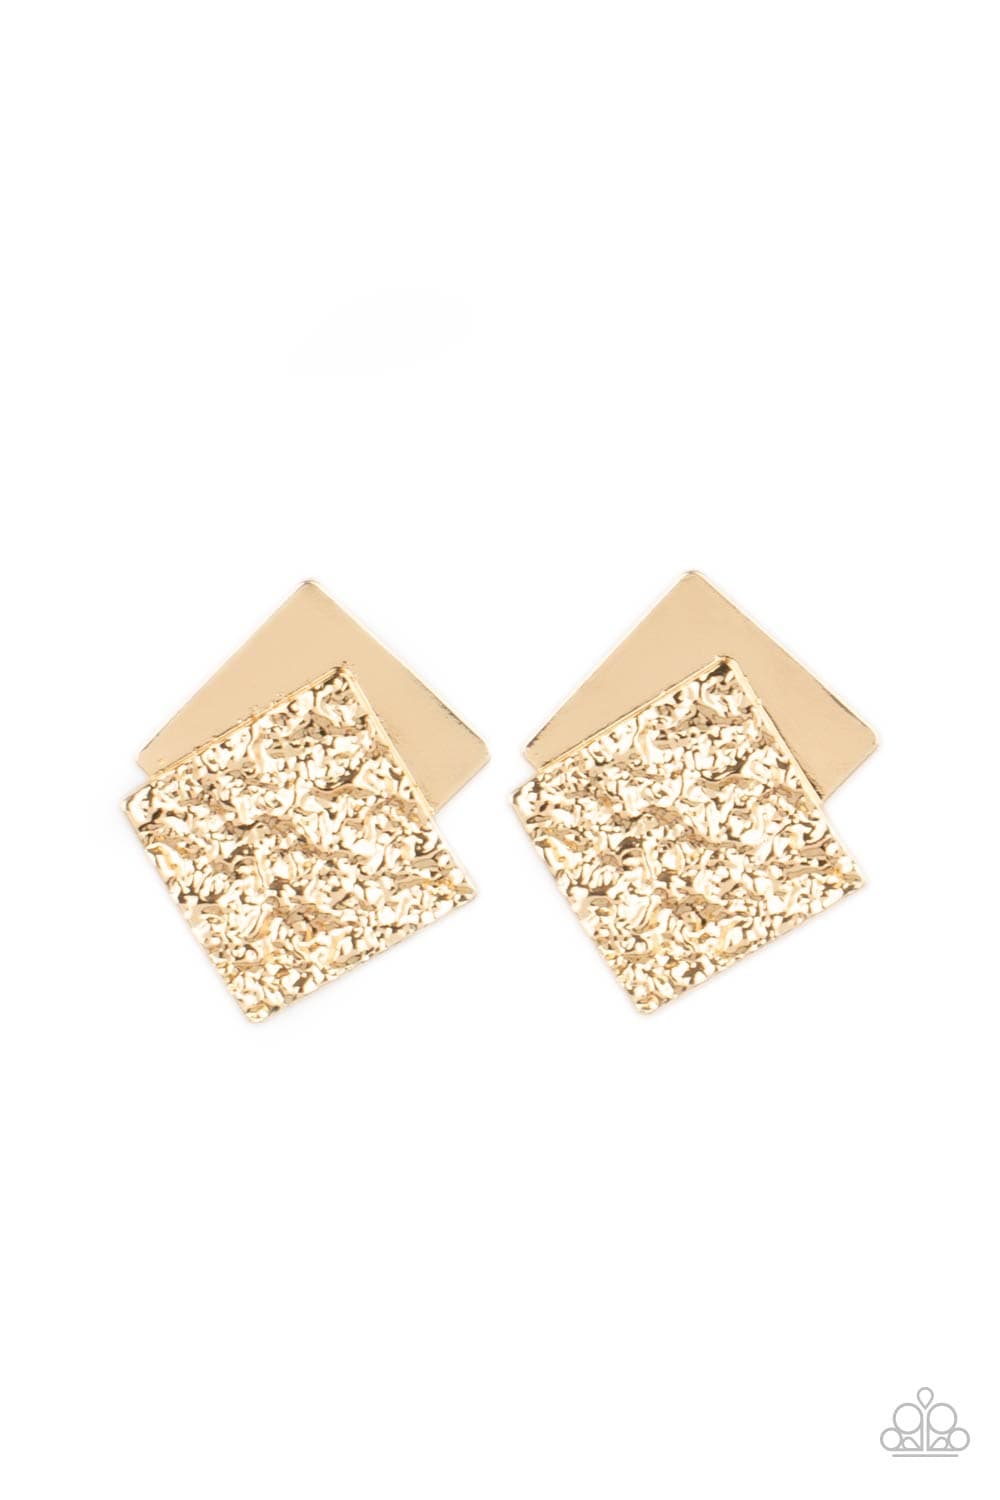 Paparazzi Accessories: Square With Style - Gold Post Earrings